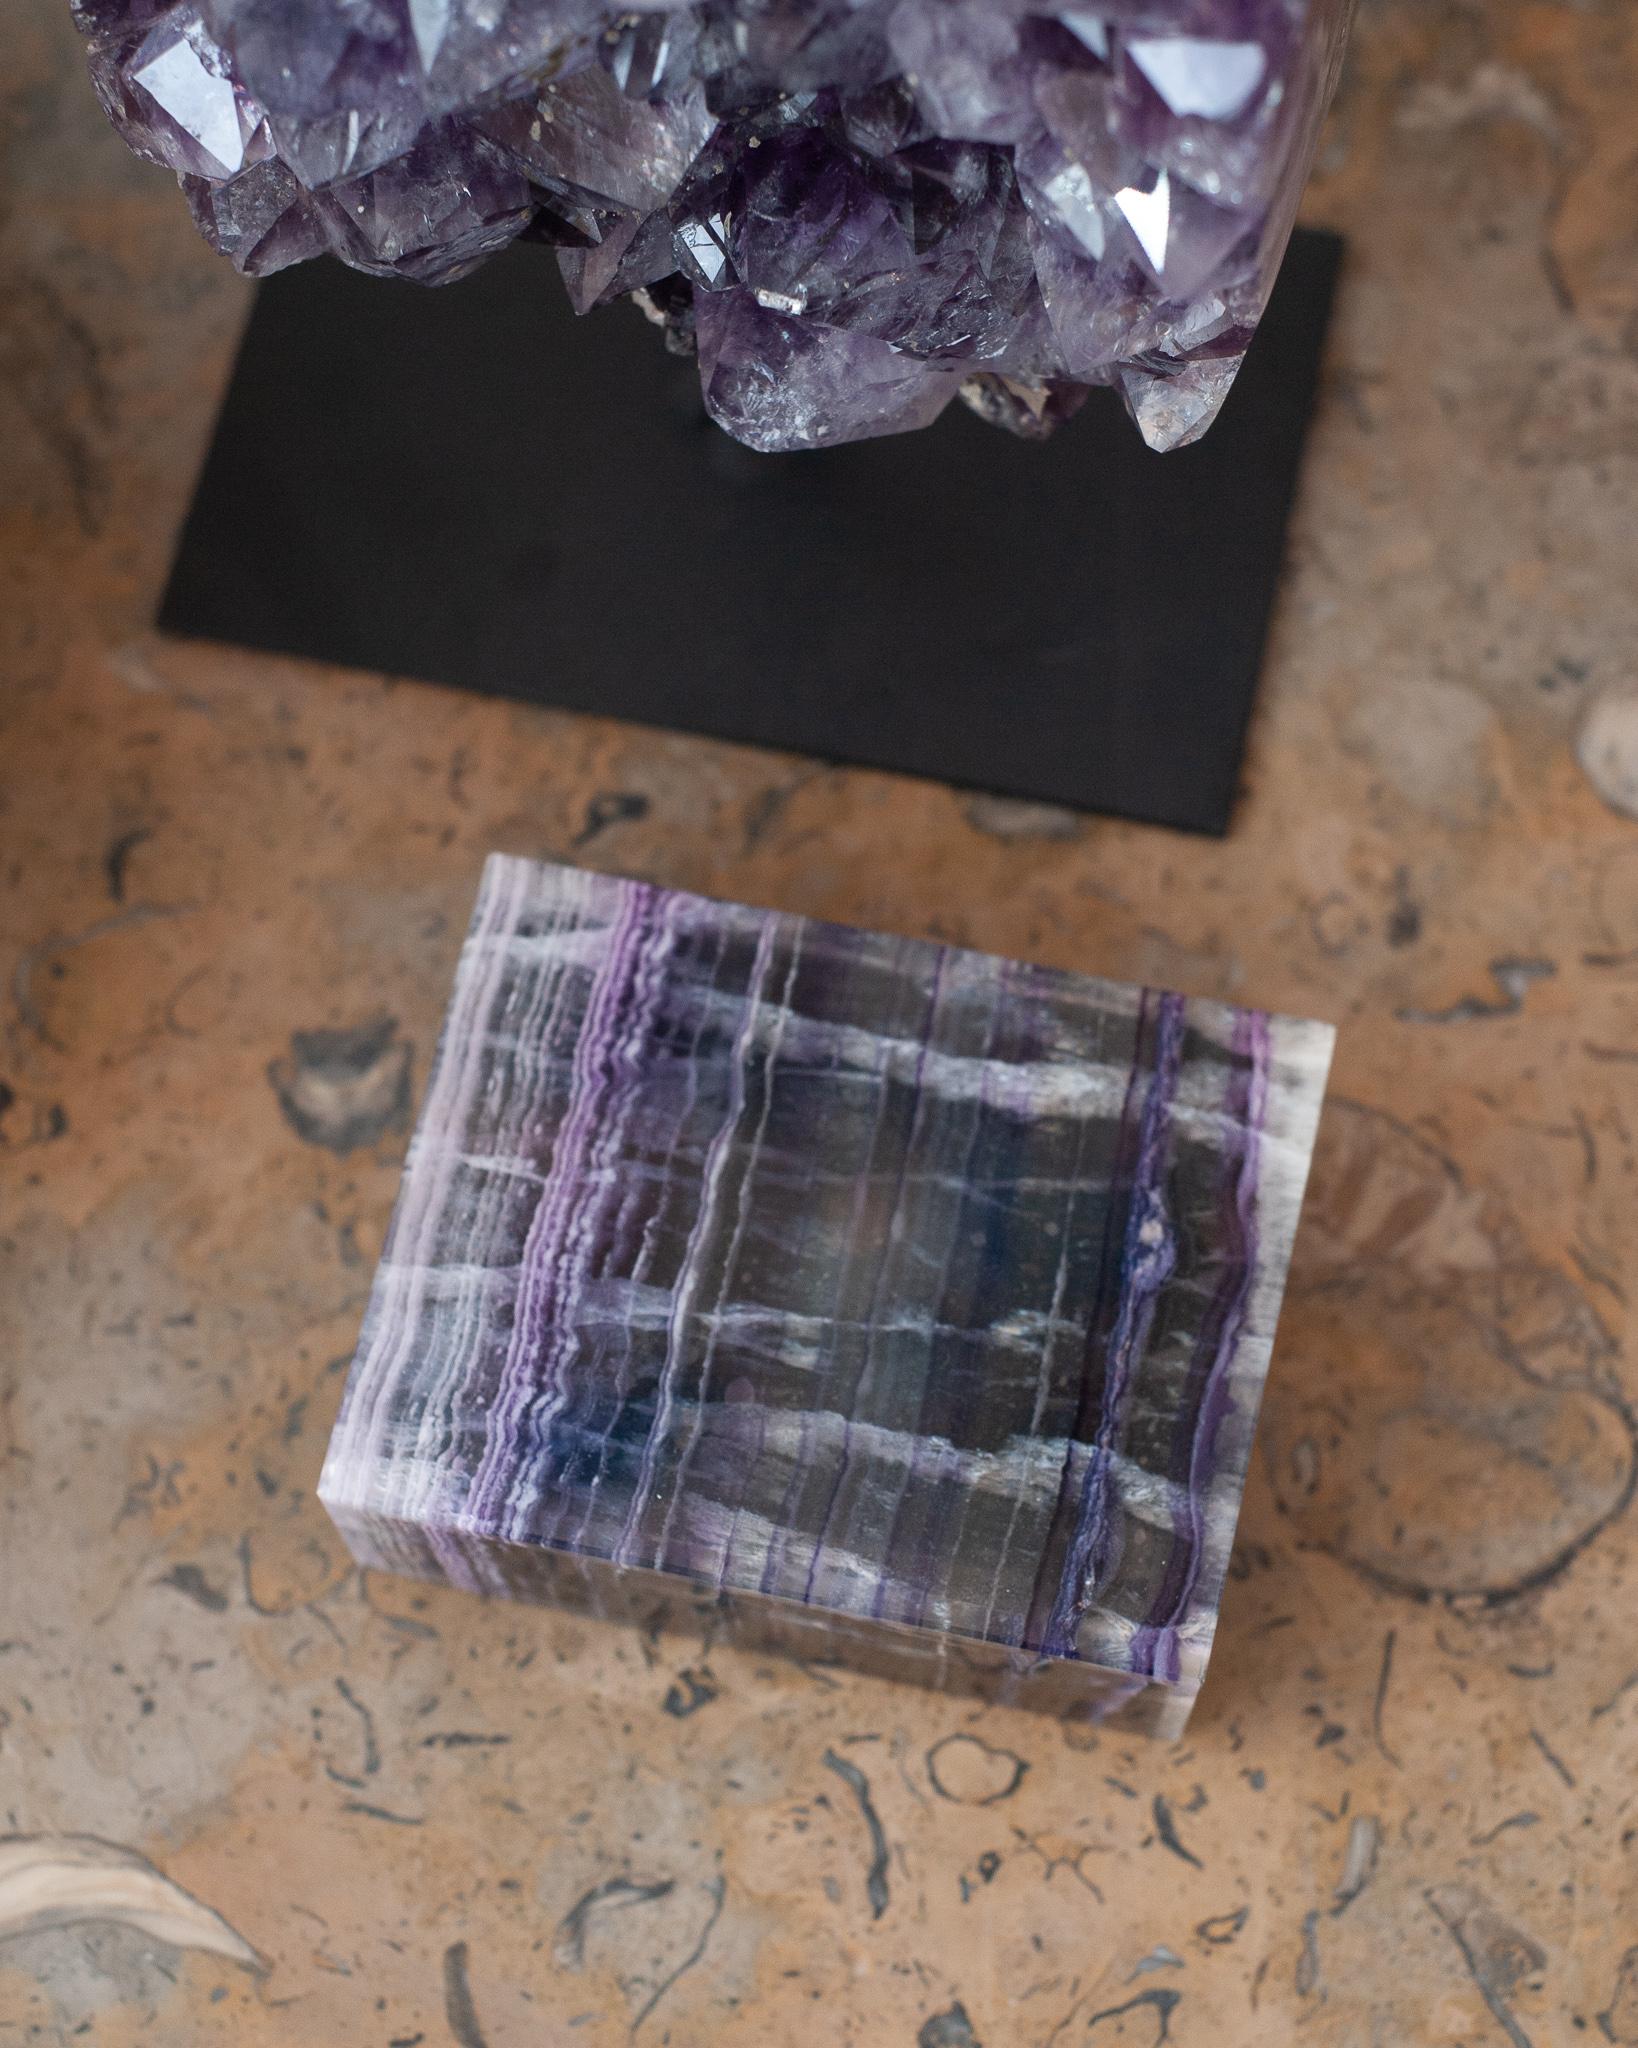 Invite healing energy into your home with this exquisite purple and clear fluorite box. This box is beautifully made with a hinged lid and expert construction. Lined in black velvet with black marble trims. Finished to a high polish to show off the